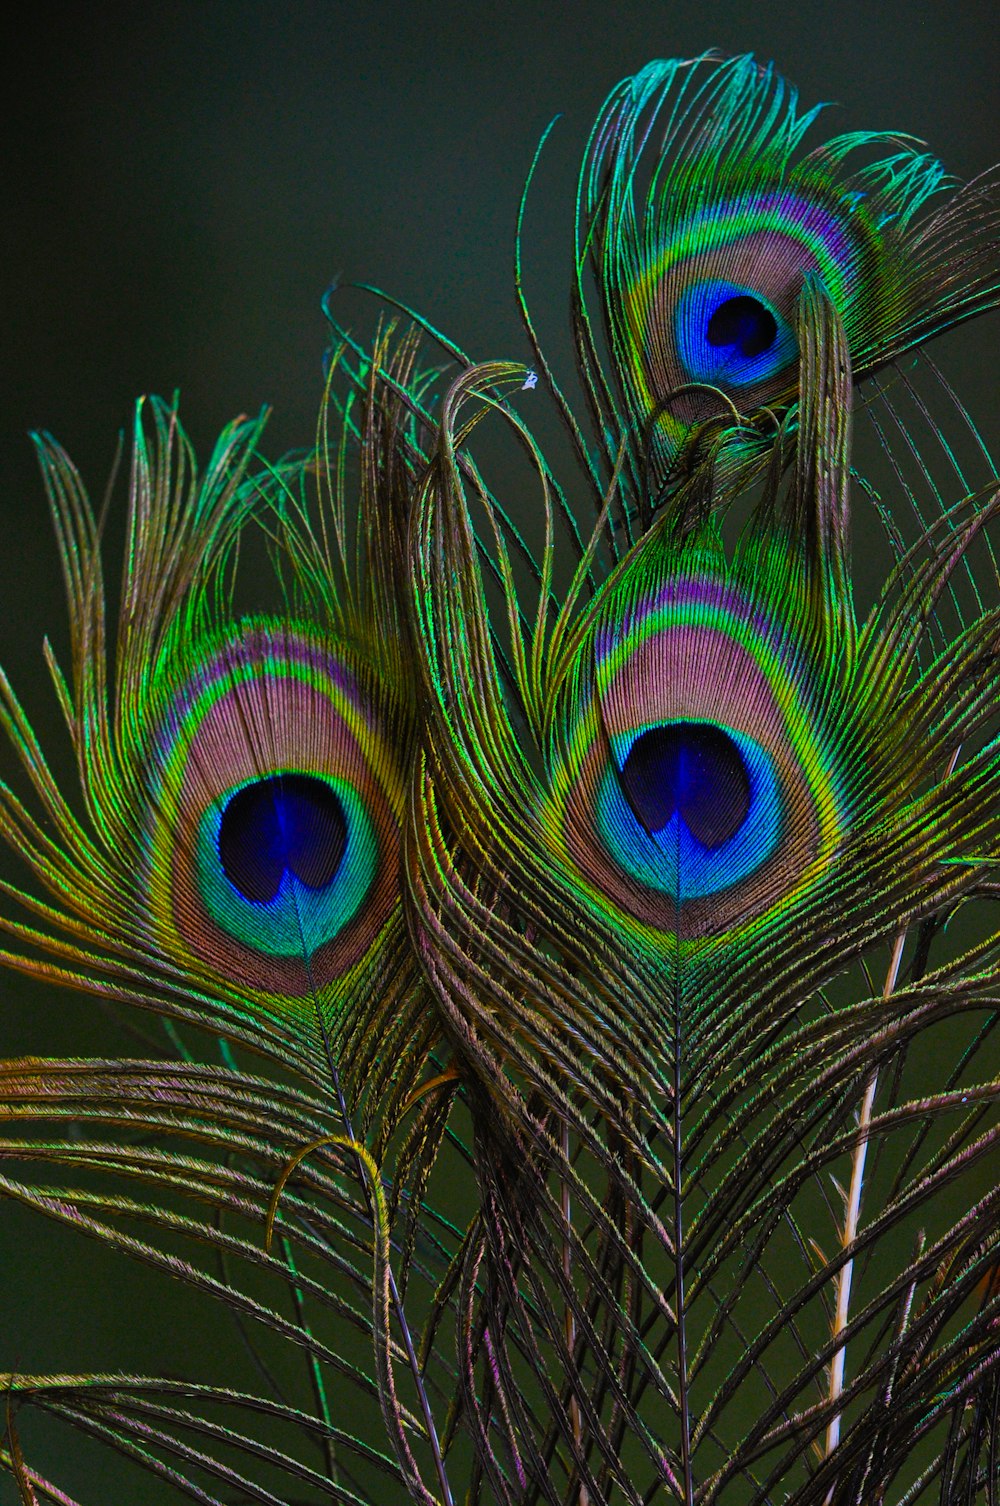 Collection of 999+ Stunning Peacock Feather Images in Full 4K Resolution